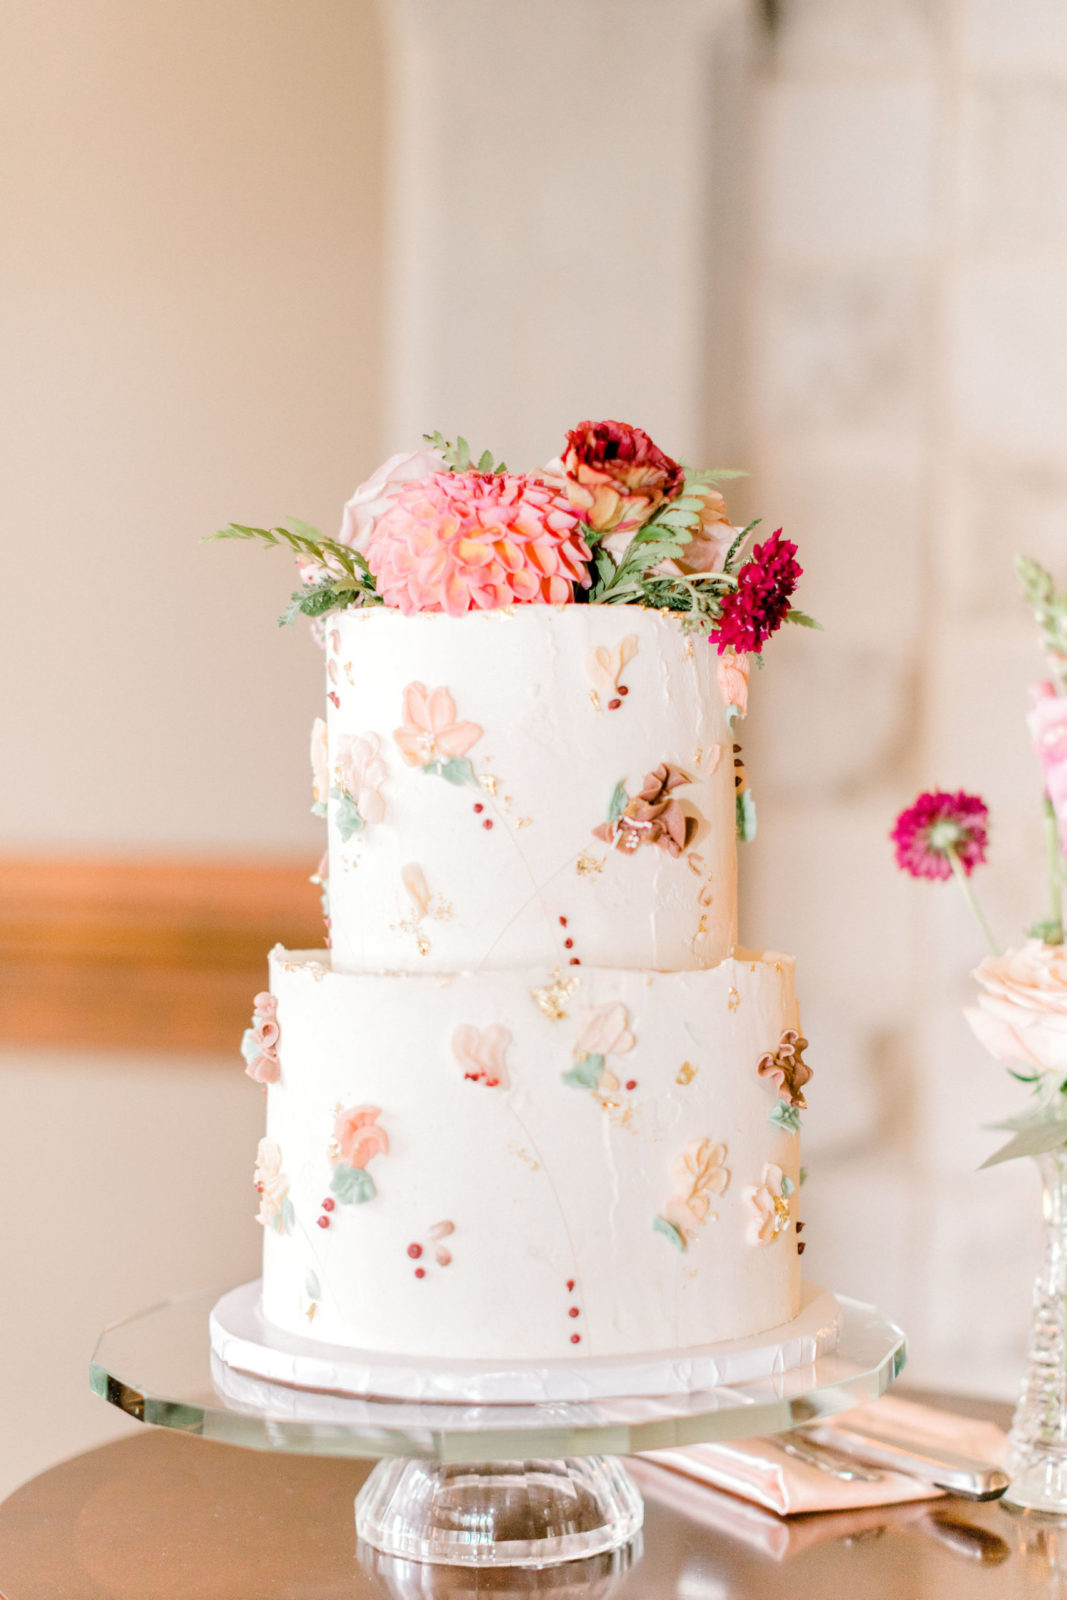 Stunning flower inspired two-tiered wedding cake in blush and pink hues